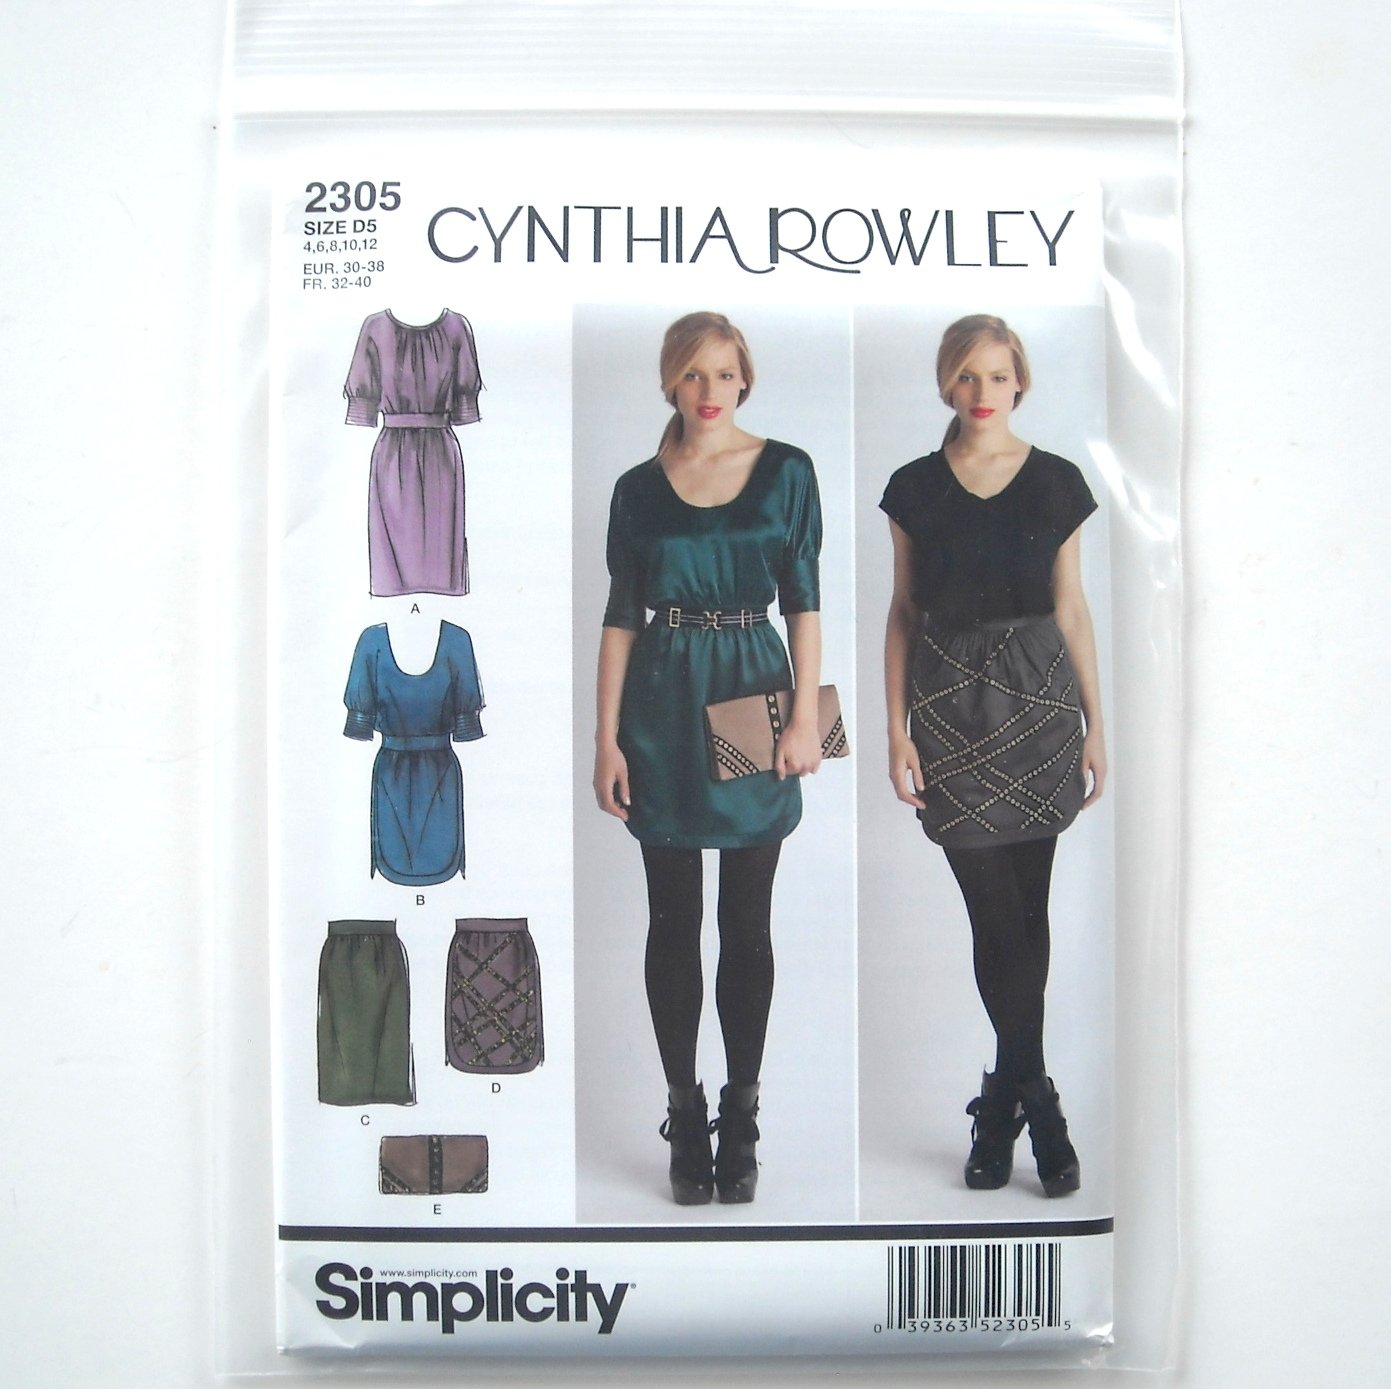 Simplicity Pattern 2305 Size 4 - 12 Cynthia Rowley Misses Womens ...